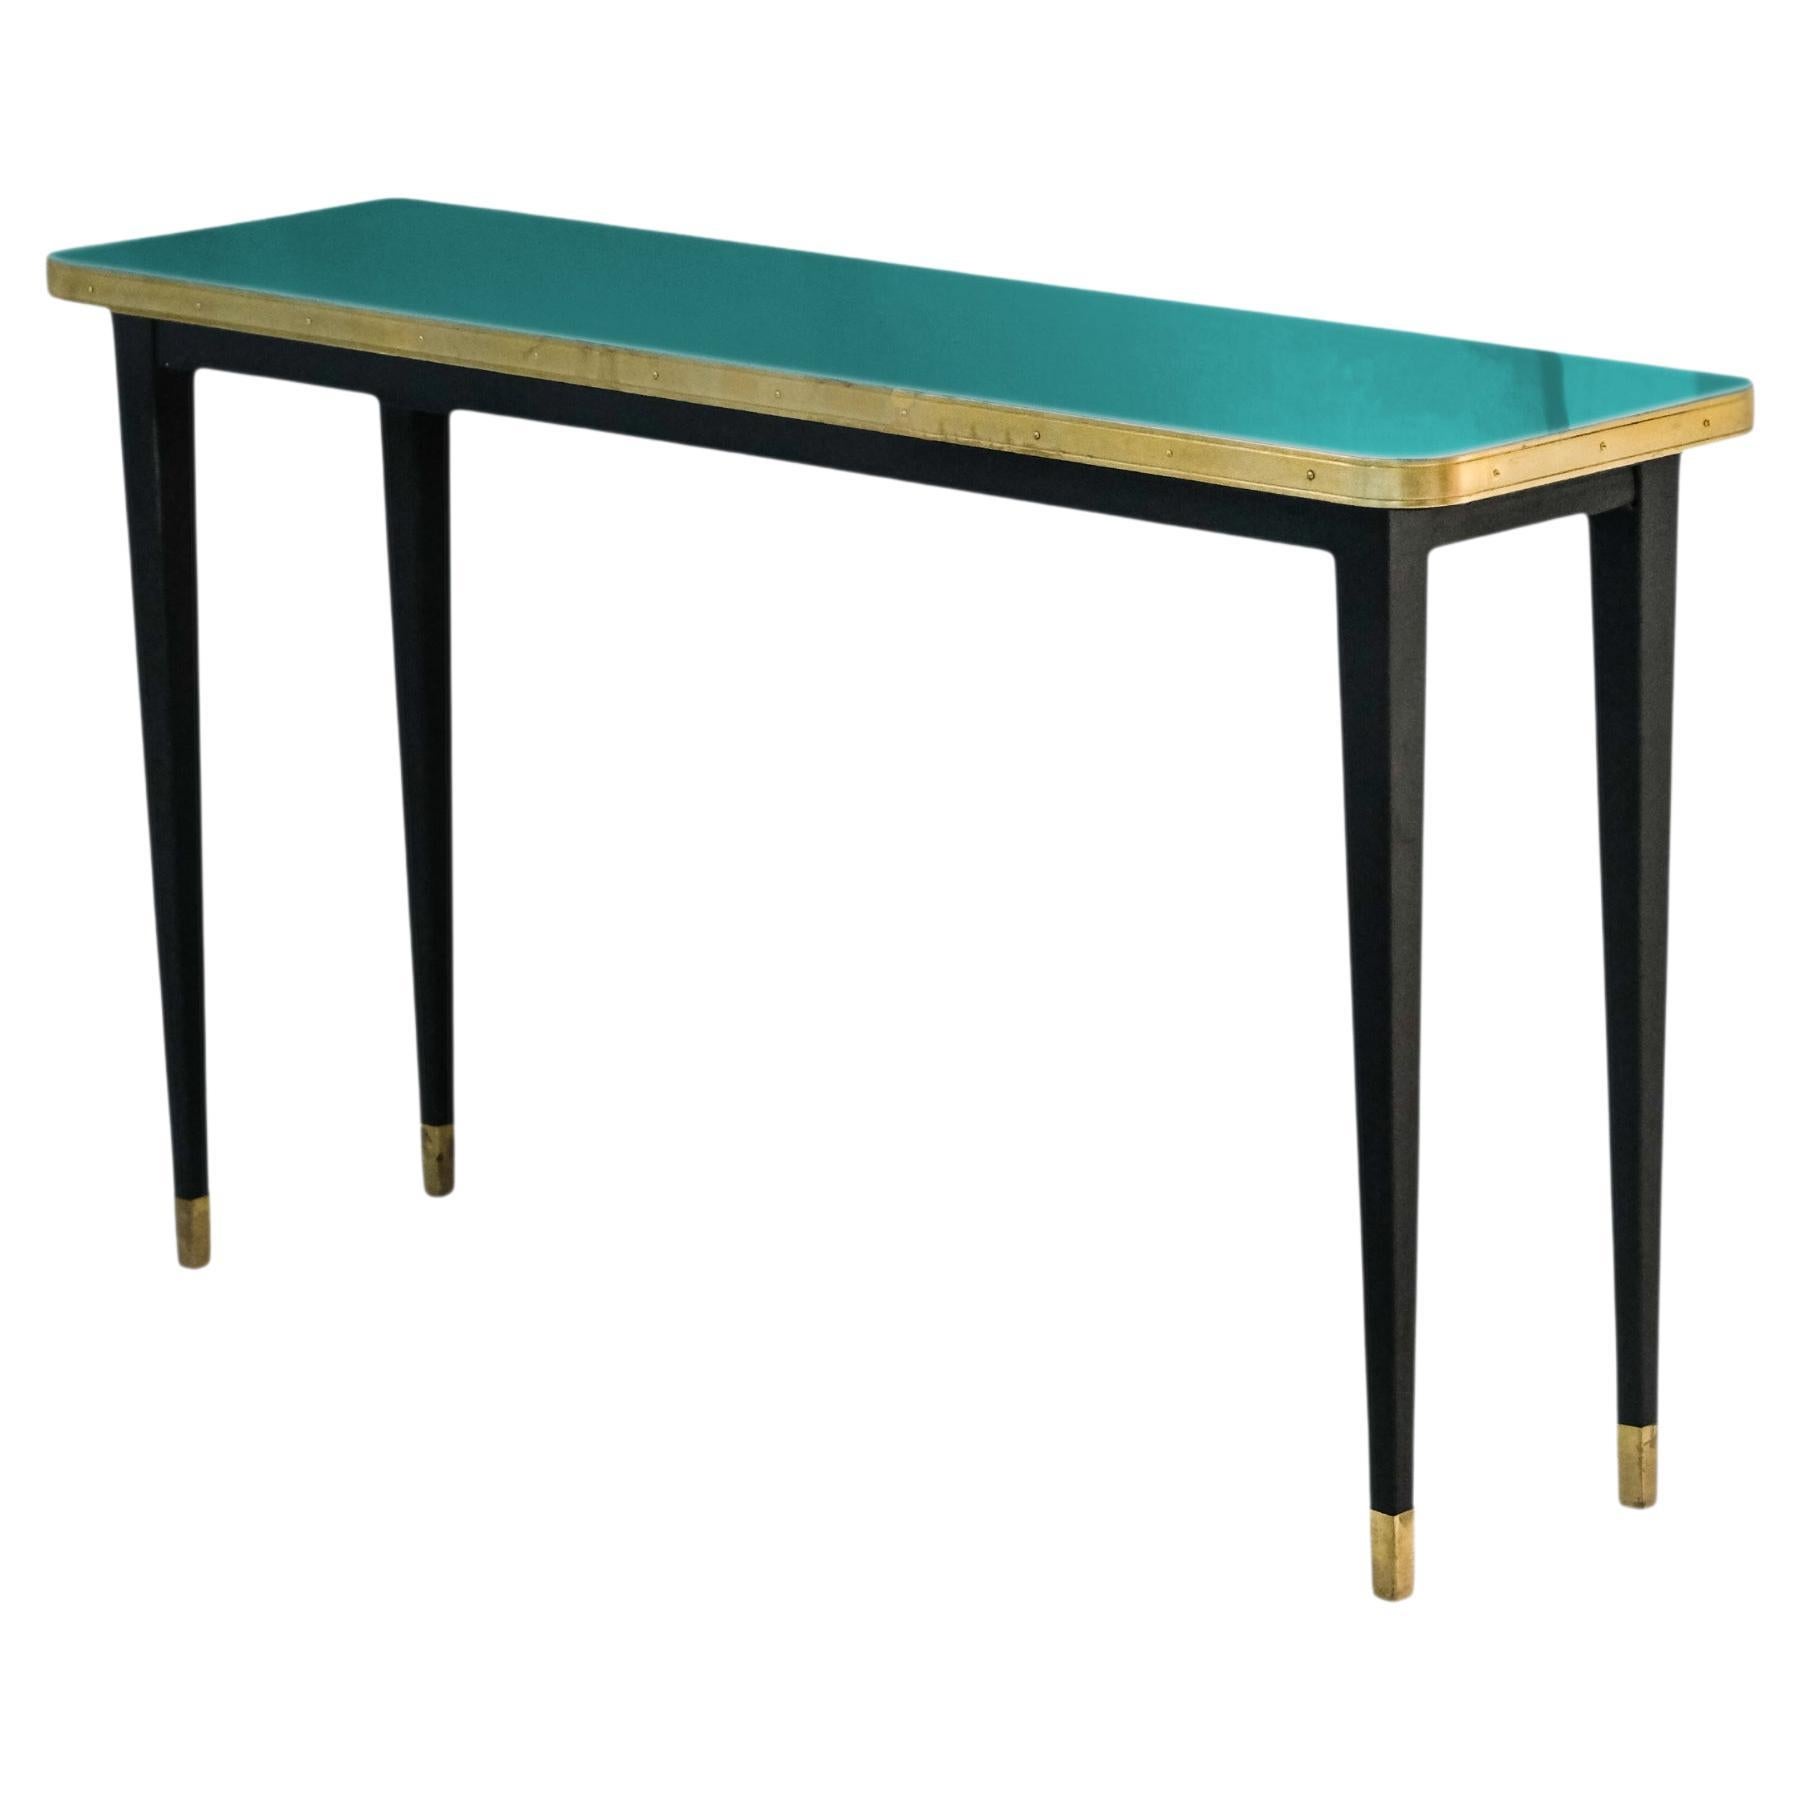 Console Table, High Gloss Laminate & Brass Details, Maui Green - M For Sale